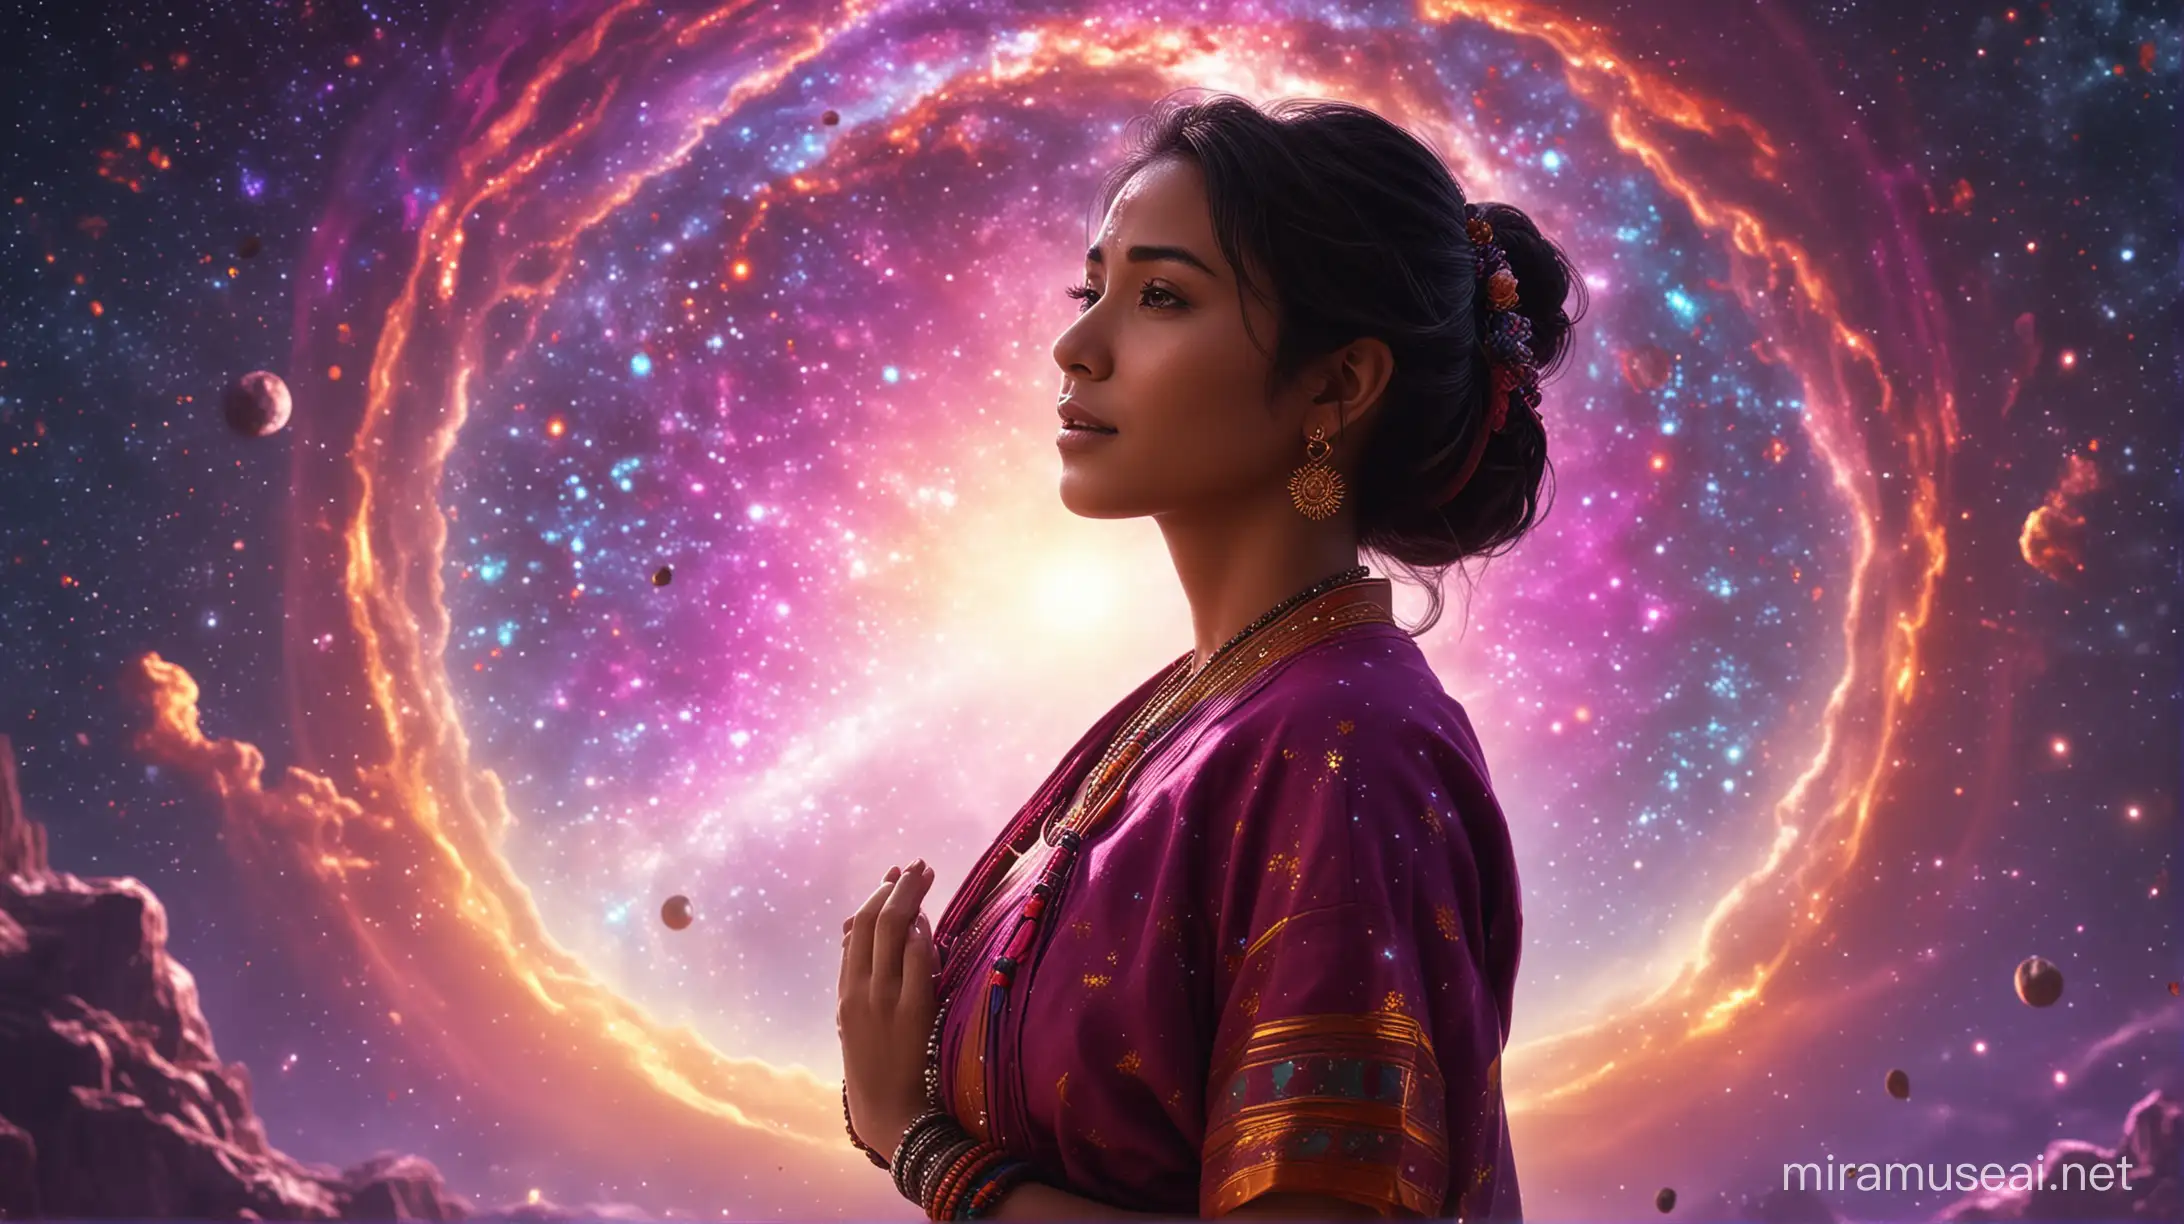 a person mix asian indian increasing Vibration & experiencing Empower Wealth Journey, and being surrounded by beautiful colors, galaxy imagination. backlight photography, CG characters, 32K, high resolution, super-realistic